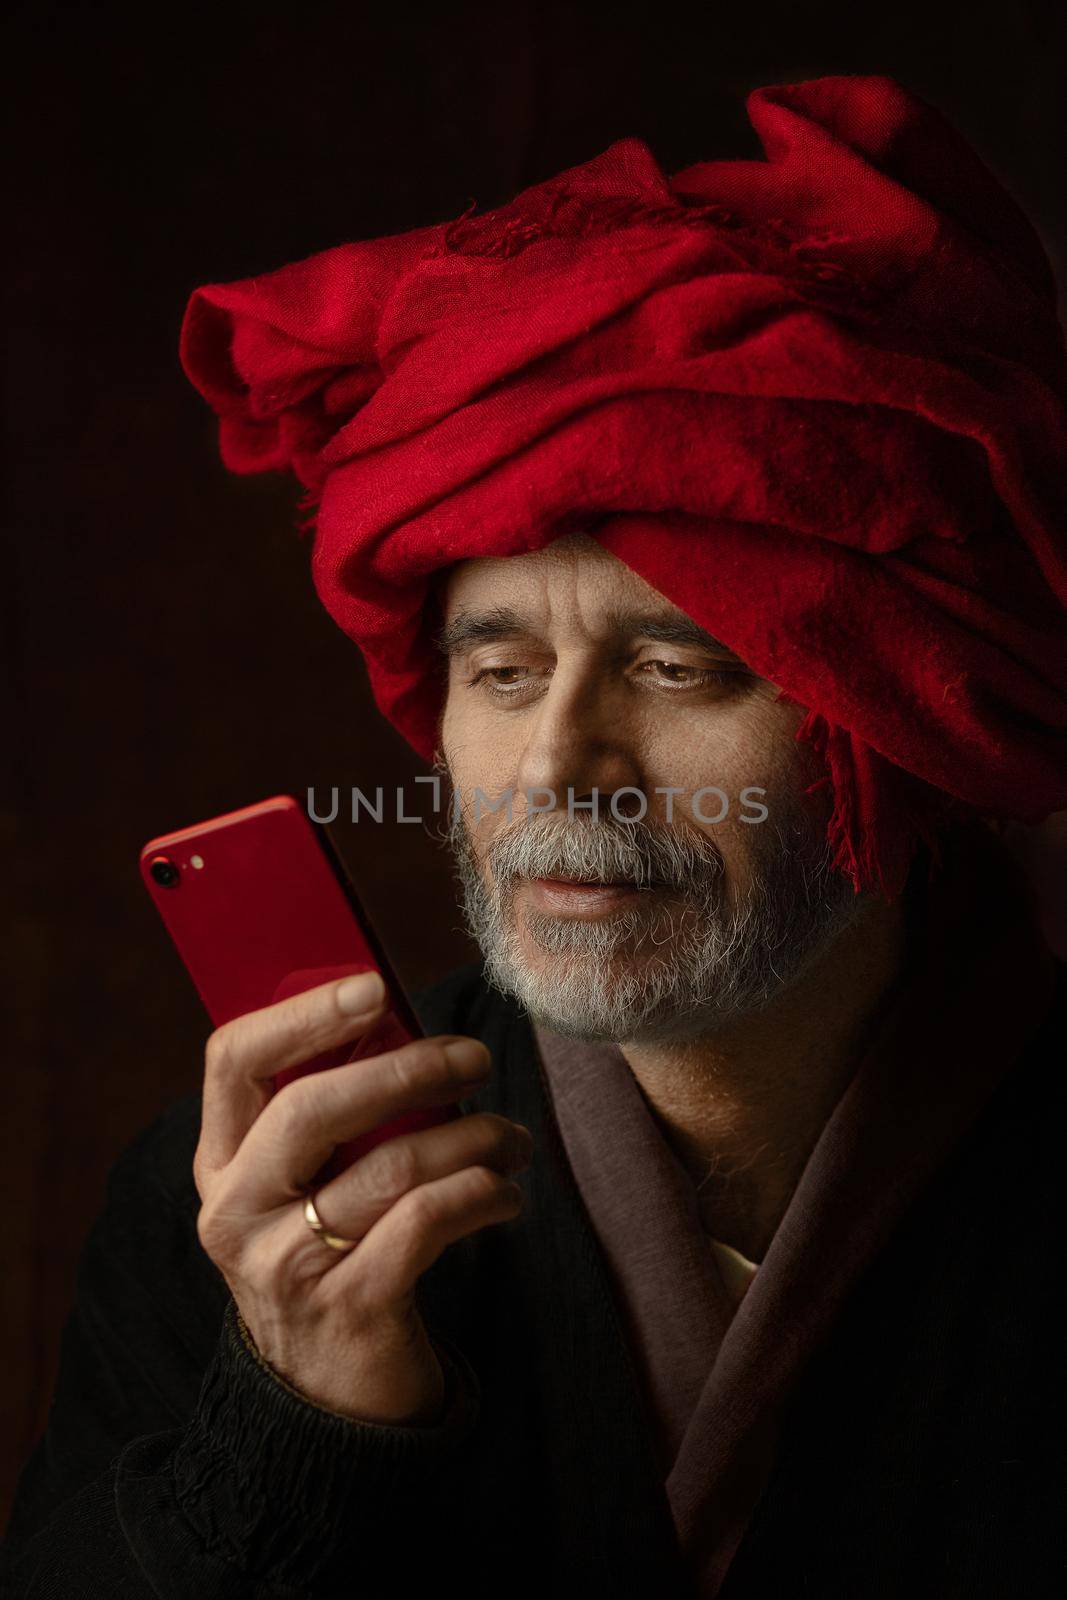 homage to Jan van Eyck's painting a man in a red turban - a photo portrait of a 21st century man with a red mobile phone matching the color of the turban. High quality photo